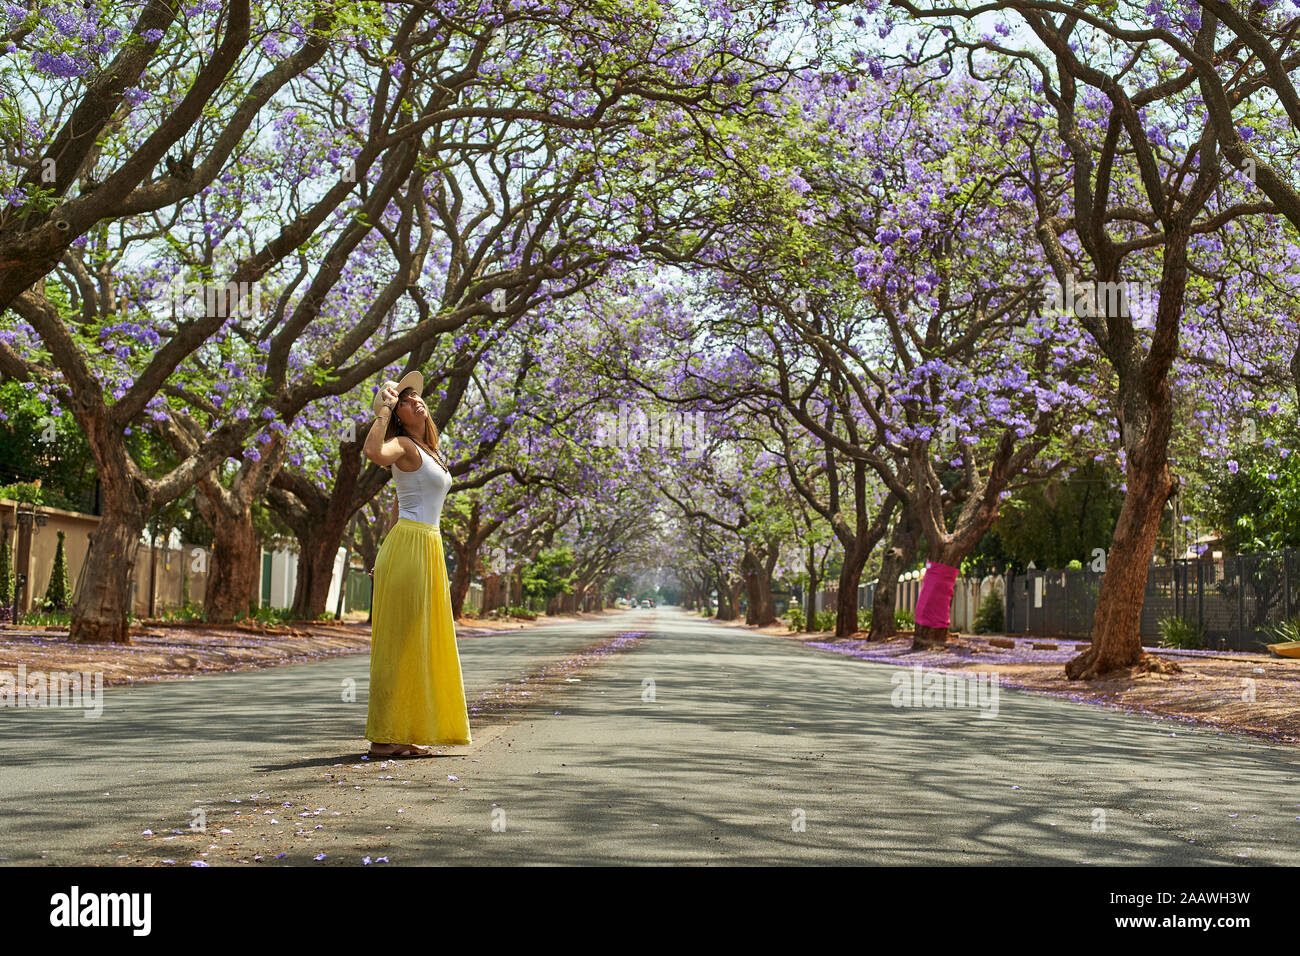 Woman wearing a hat, standing in the middle of a street full of jacaranda trees in bloom, Pretoria, South Africa Stock Photo